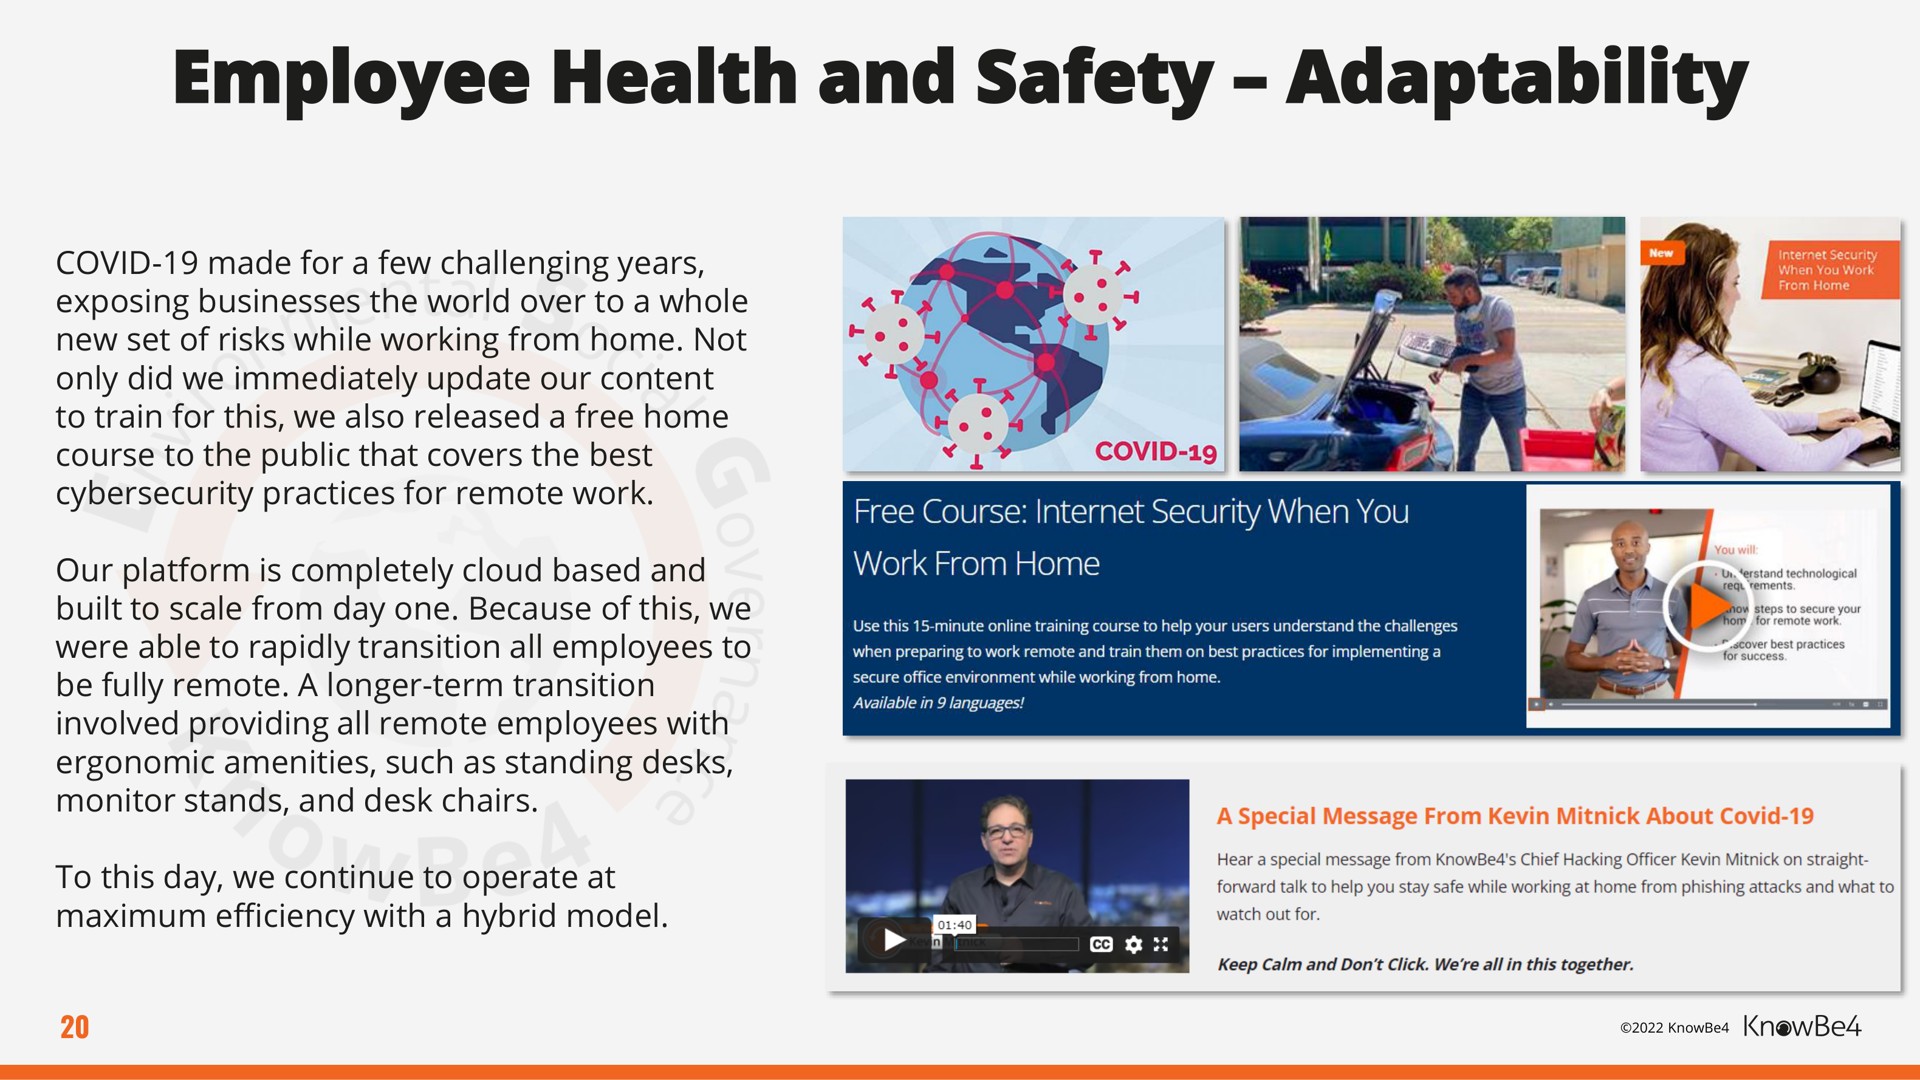 employee health and safety adaptability | KnowBe4